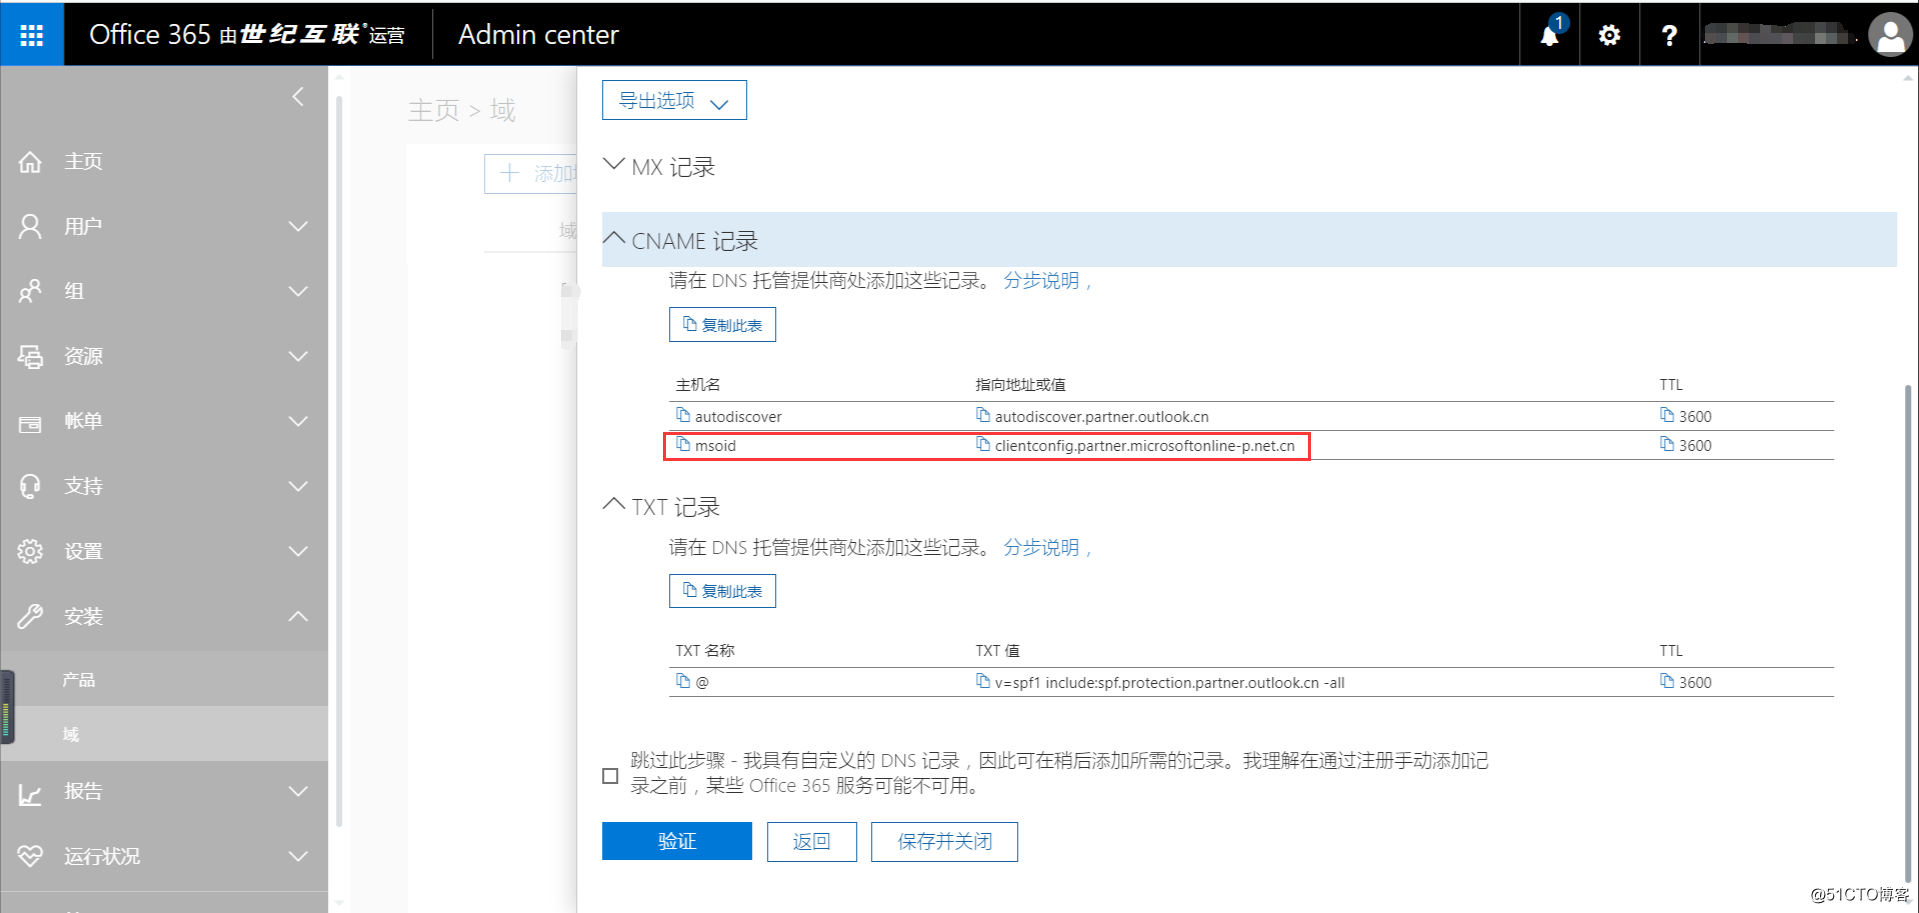 Exchange 2013 CU17 and Office 365 Hybrid Deployment (1)